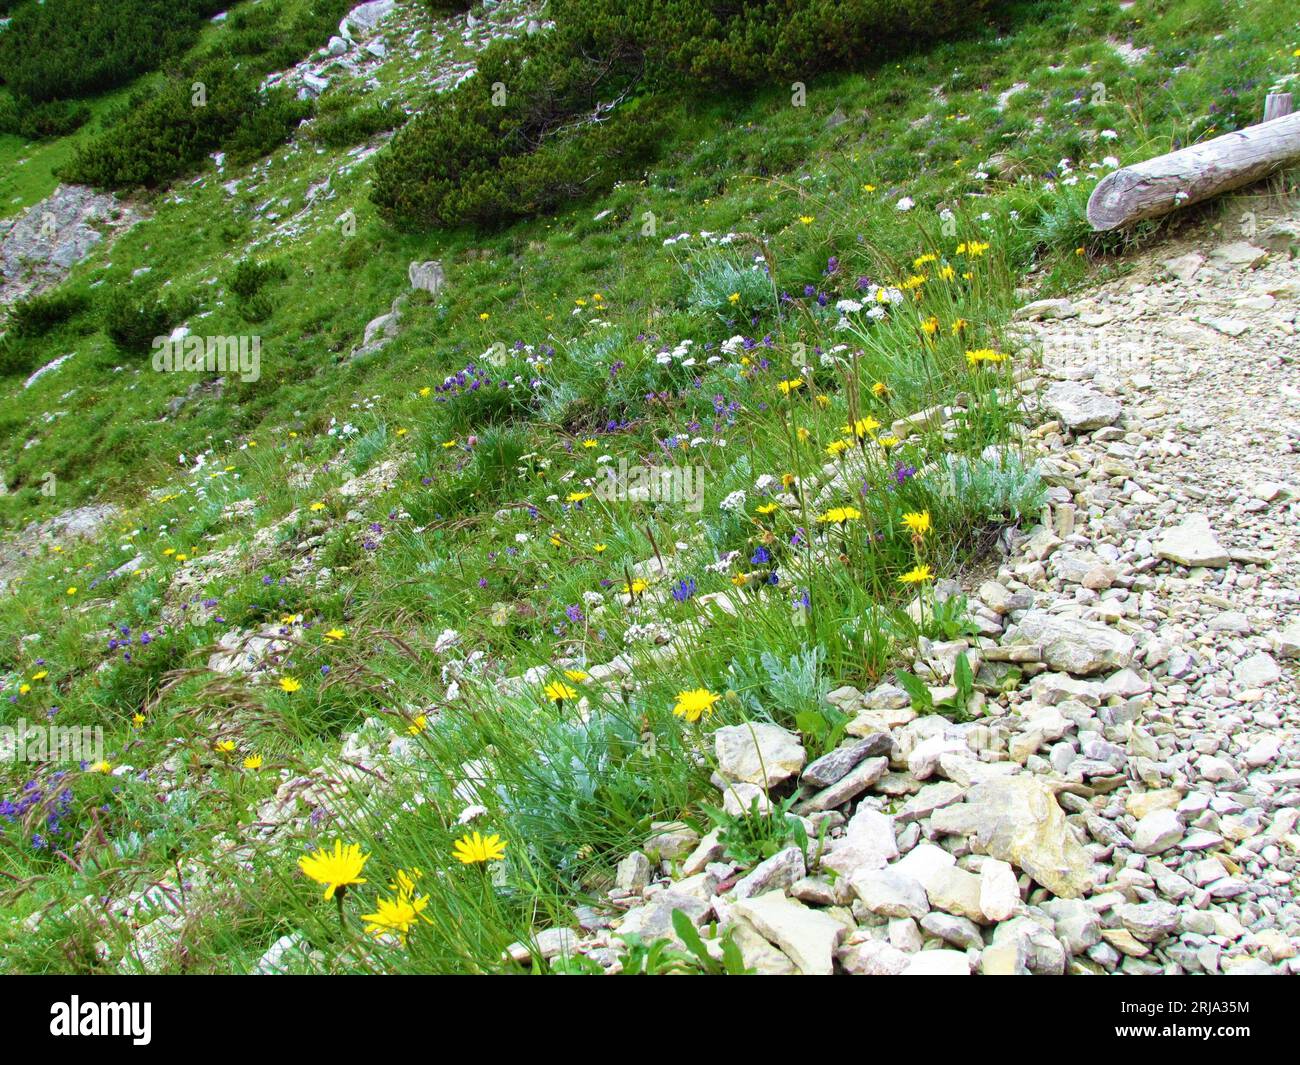 Colorful alpine meadow on rocky terrain with yellow, blue and white flowers incl. silvery yarrow (Achillea clavennae) in julian alps Stock Photo